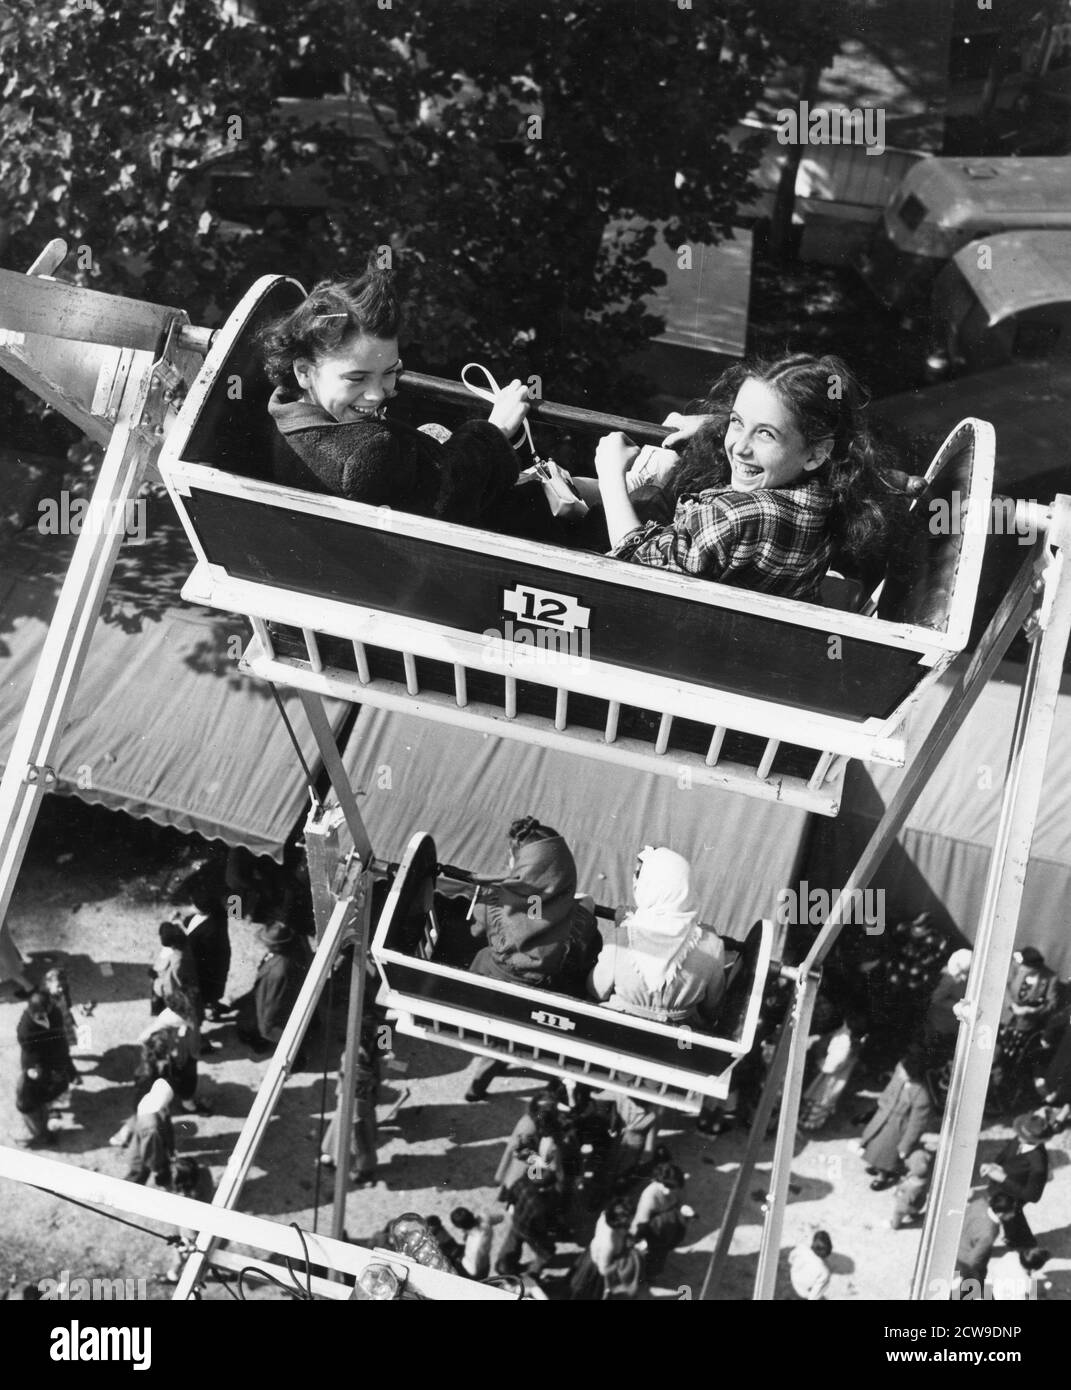 Smiling girls look back at the photographer as they ride the Ferris wheel at a county fair, Lancaster, OH, 1949. (Photo by United States Information Agency/RBM Vintage Images) Stock Photo